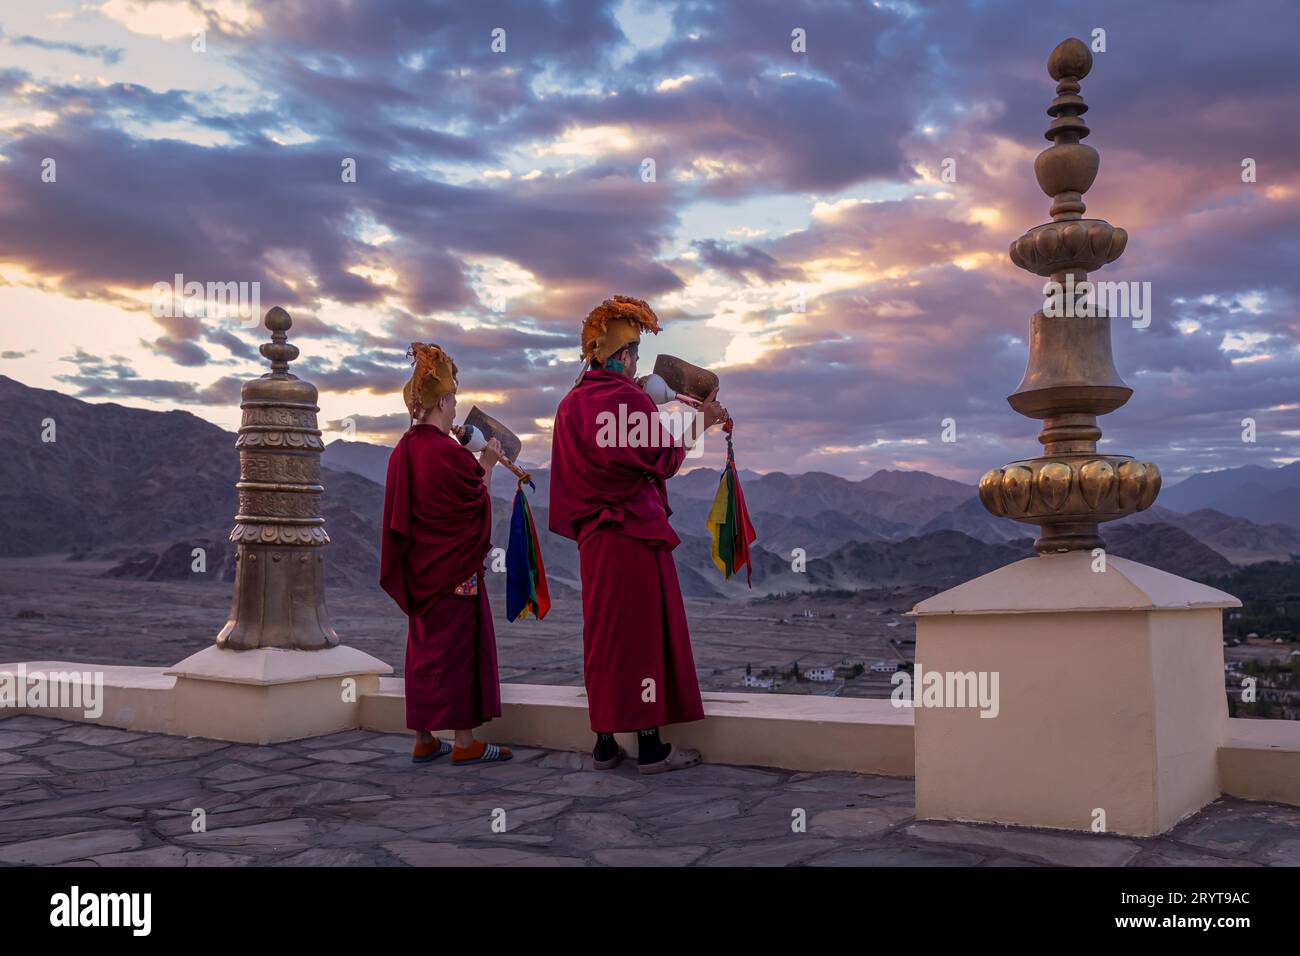 Buddhist monks blowing conch shells at Thikse Monastery (Thiksay Gompa), Ladakh, India Stock Photo